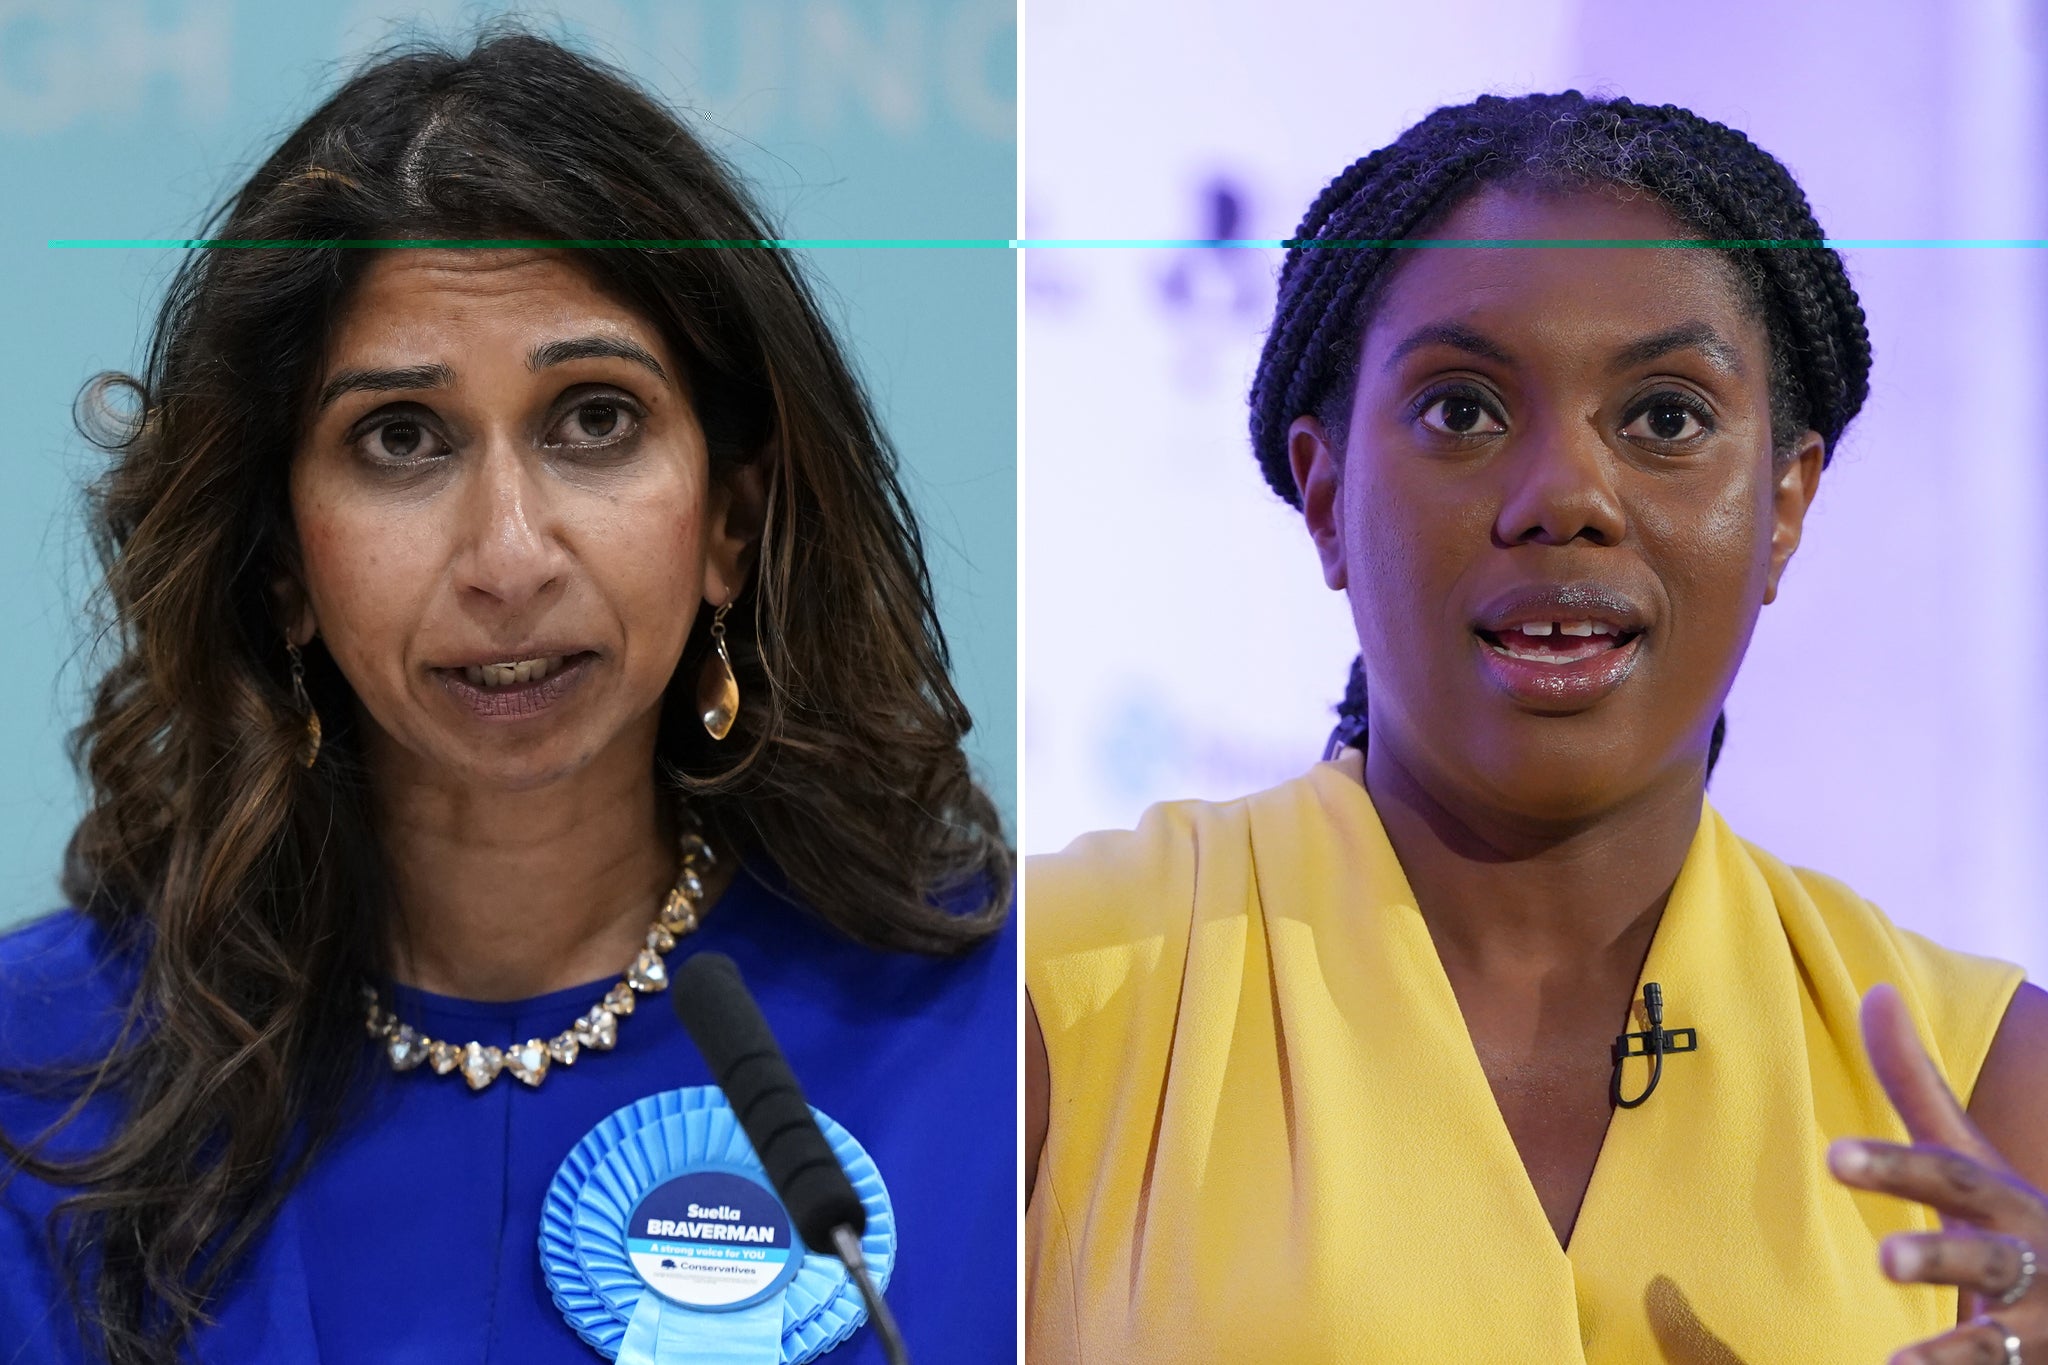 Suella Braverman and Kemi Badenoch became embroiled in a public spat just days after the general election